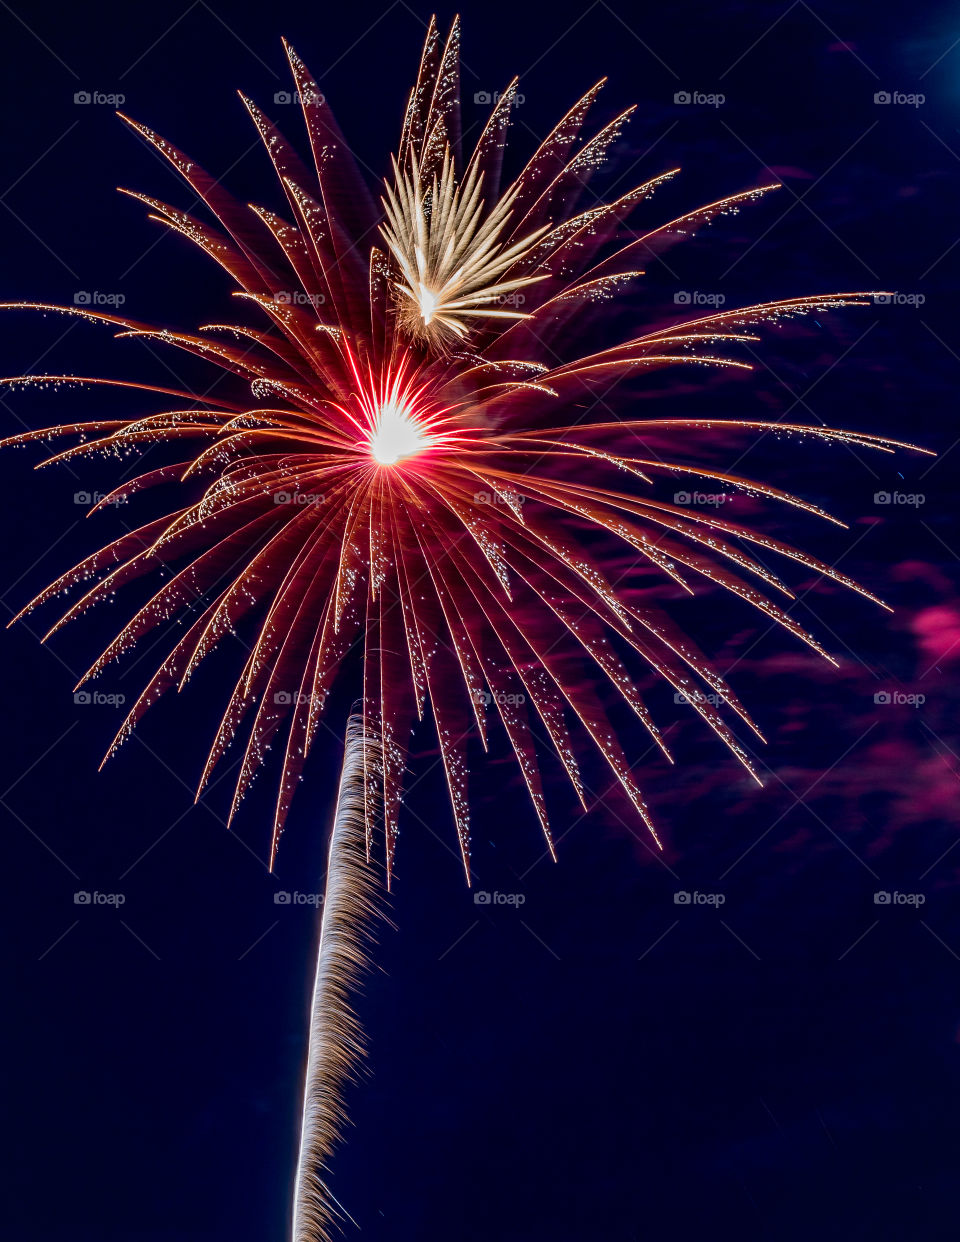 Fireworks display on independence day in Brookfield Wisconsin